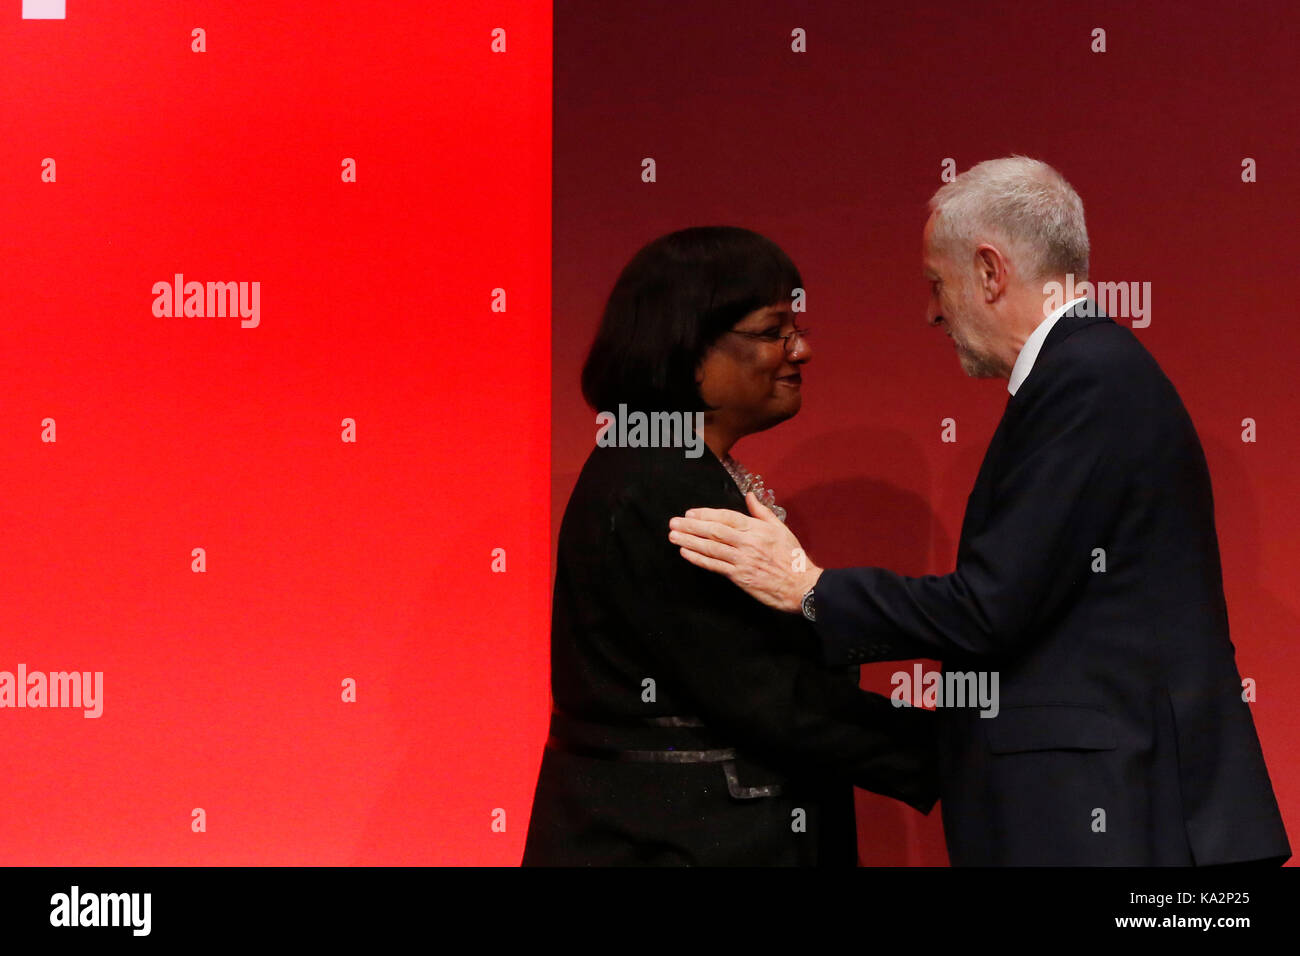 Brighton, UK. 24th September, 2017. Jeremy Corbyn, leader of Britain's opposition Labour party congratulates Diane Abbott, Shadow Home Secretary, after her speech during the annual Labour Party Conference in Brighton, UK Sunday, September 24, 2017. Photograph : Credit: Luke MacGregor/Alamy Live News Stock Photo